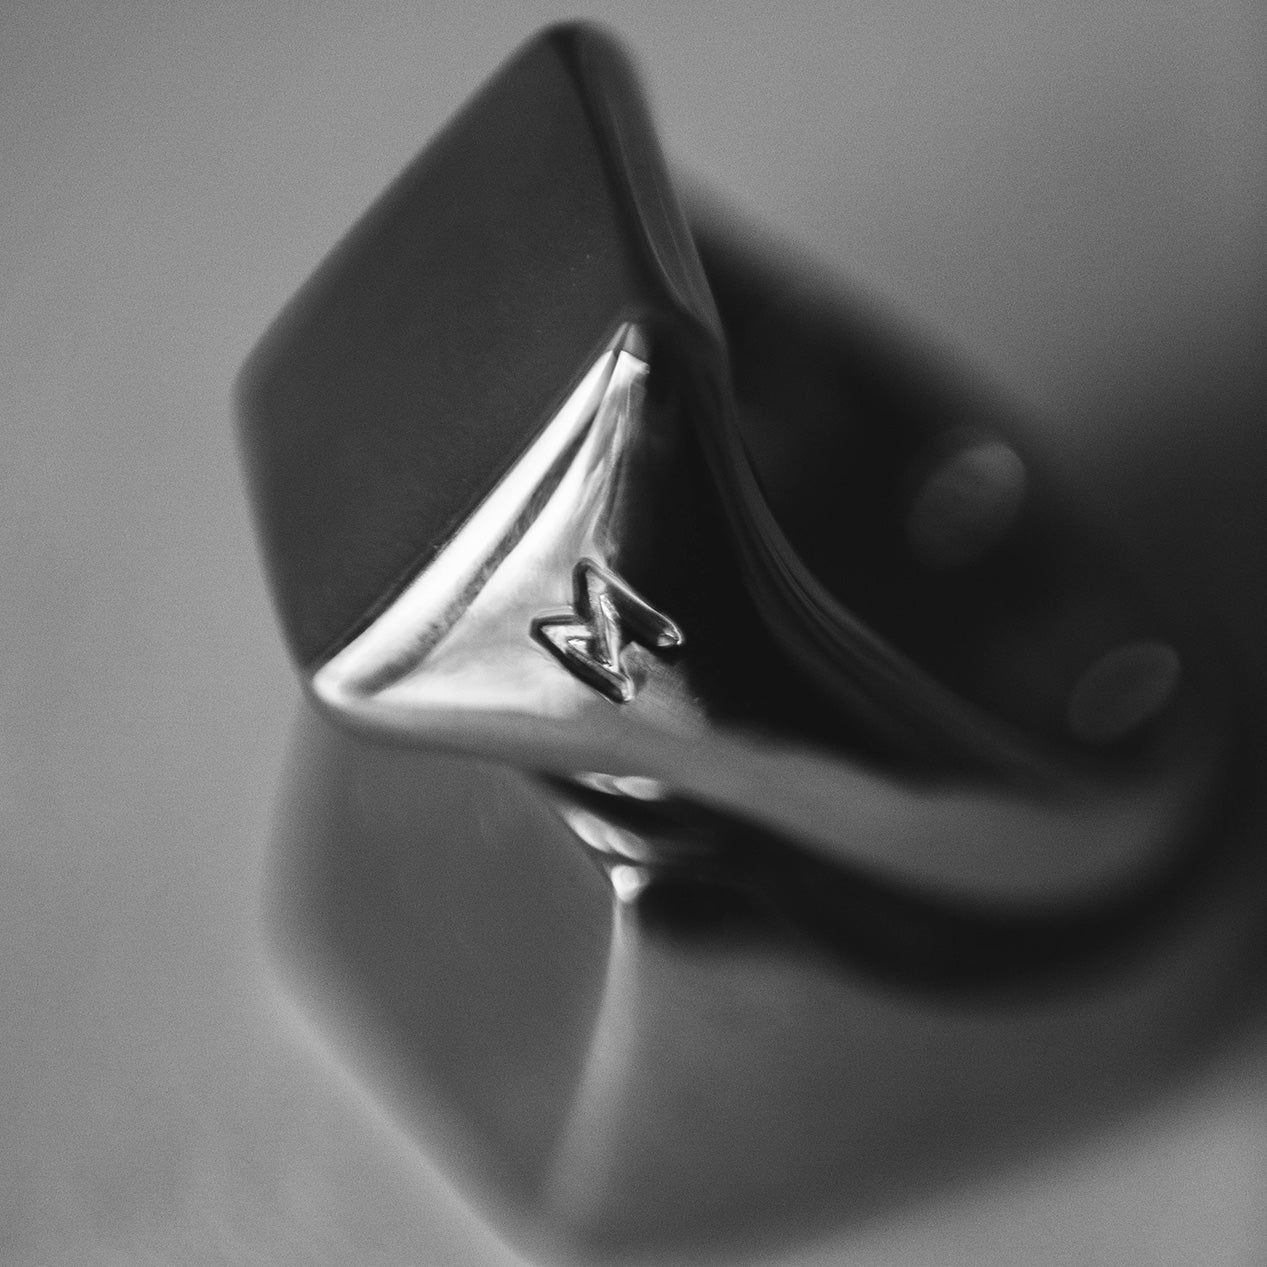 Single silver-colored titanium signet ring, 15x15 mm wide surface. Image shows the ring laying on a reflective surface.